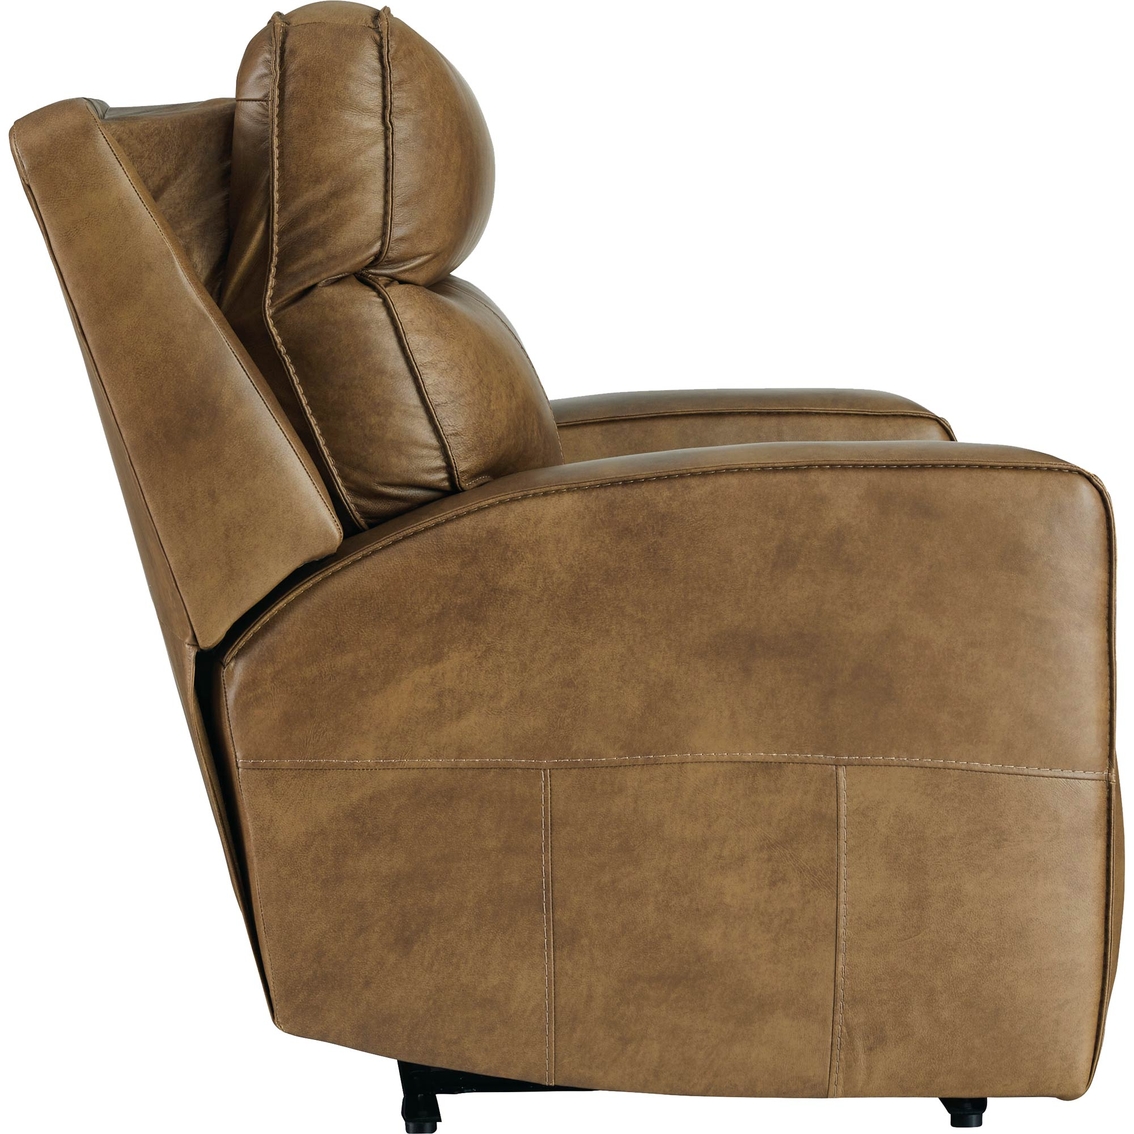 Signature Design by Ashley Game Plan Oversized Power Recliner - Image 3 of 9